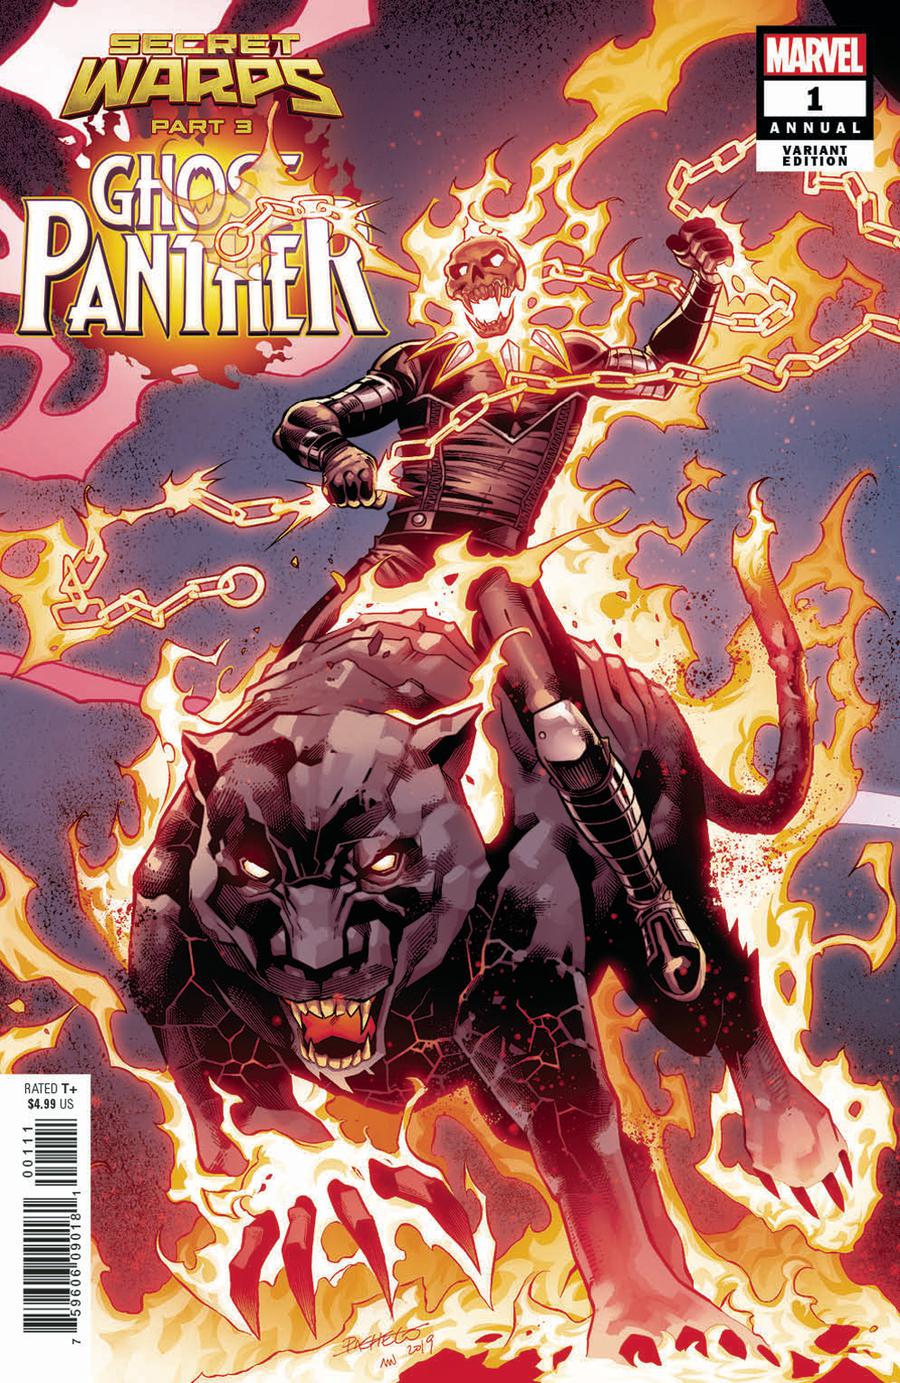 Secret Warps Ghost Panther Annual #1 Cover B Variant Carlos Pacheco Connecting Cover (Secret Warps Part 3)